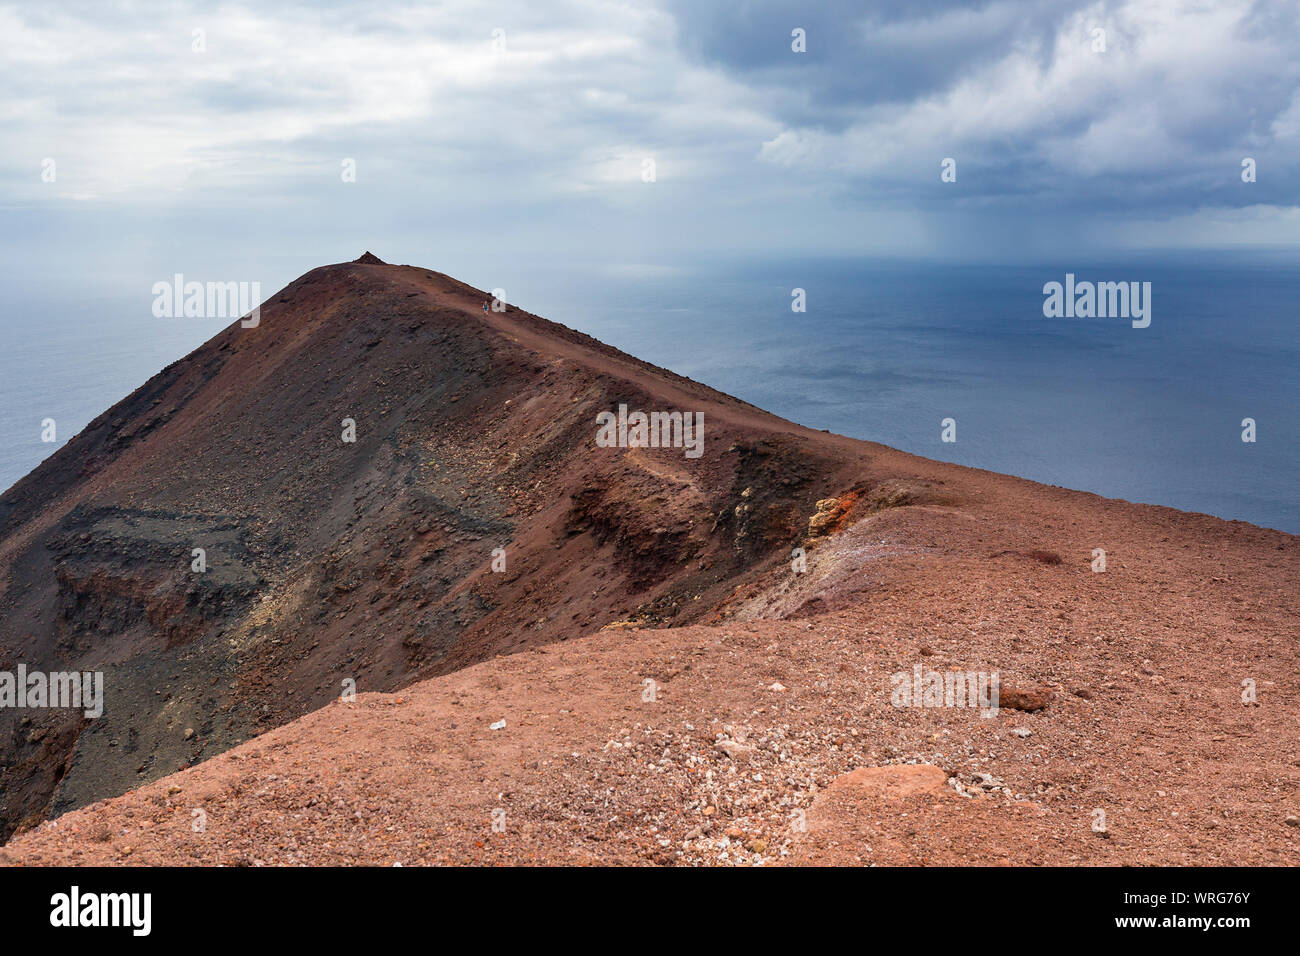 Peak of the colorful crater of the volcano Teneguia in the south of La Palma above the sea. Stock Photo